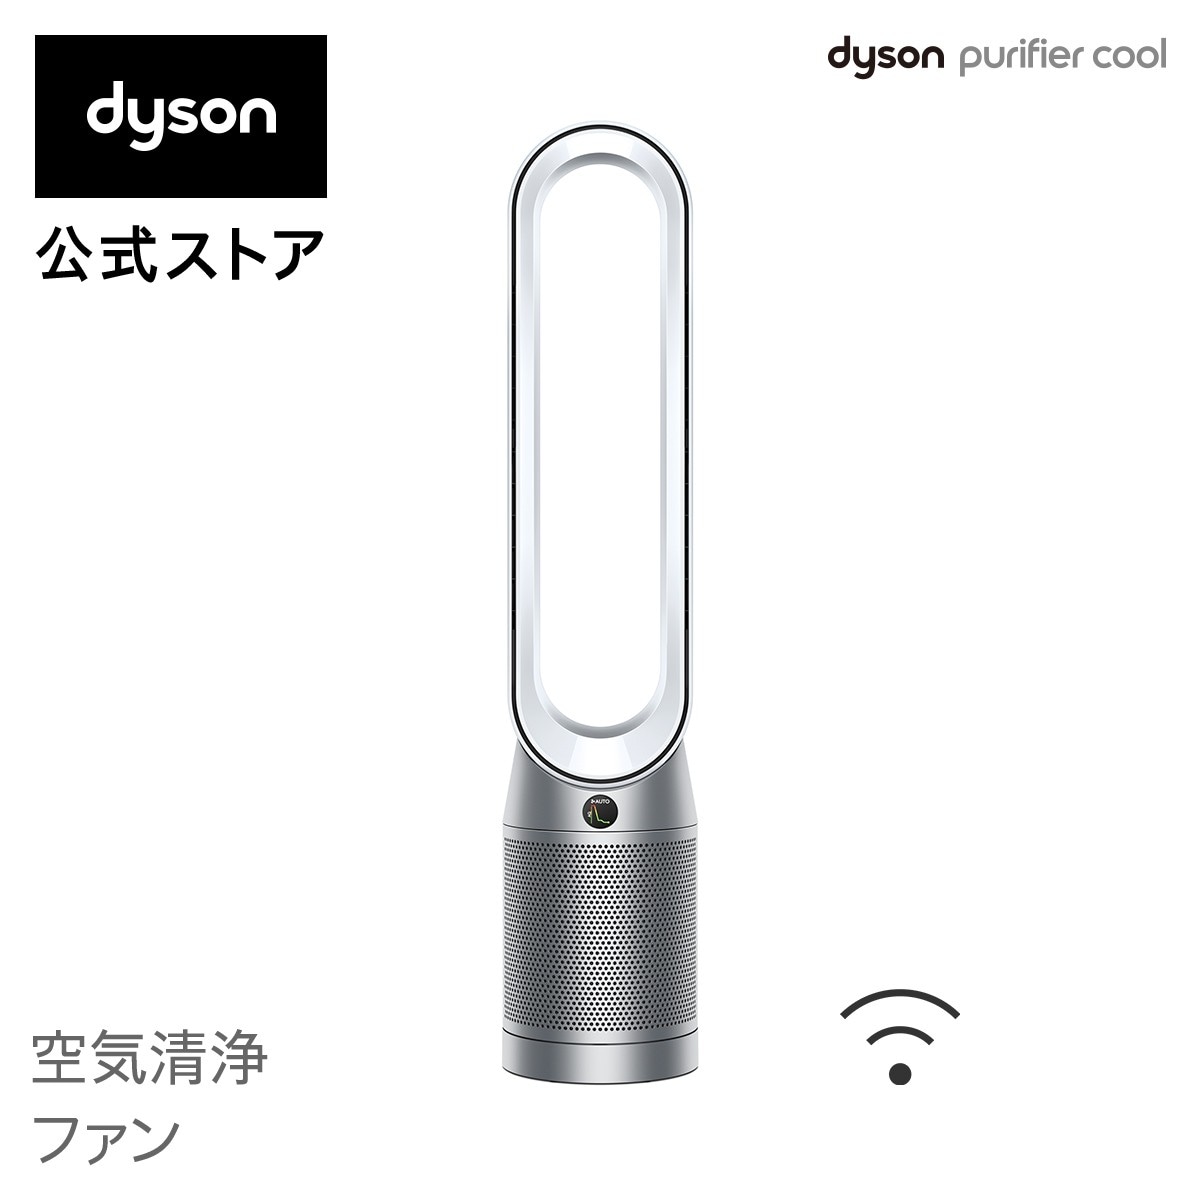 dyson Purifier Cool 空気清浄ファン